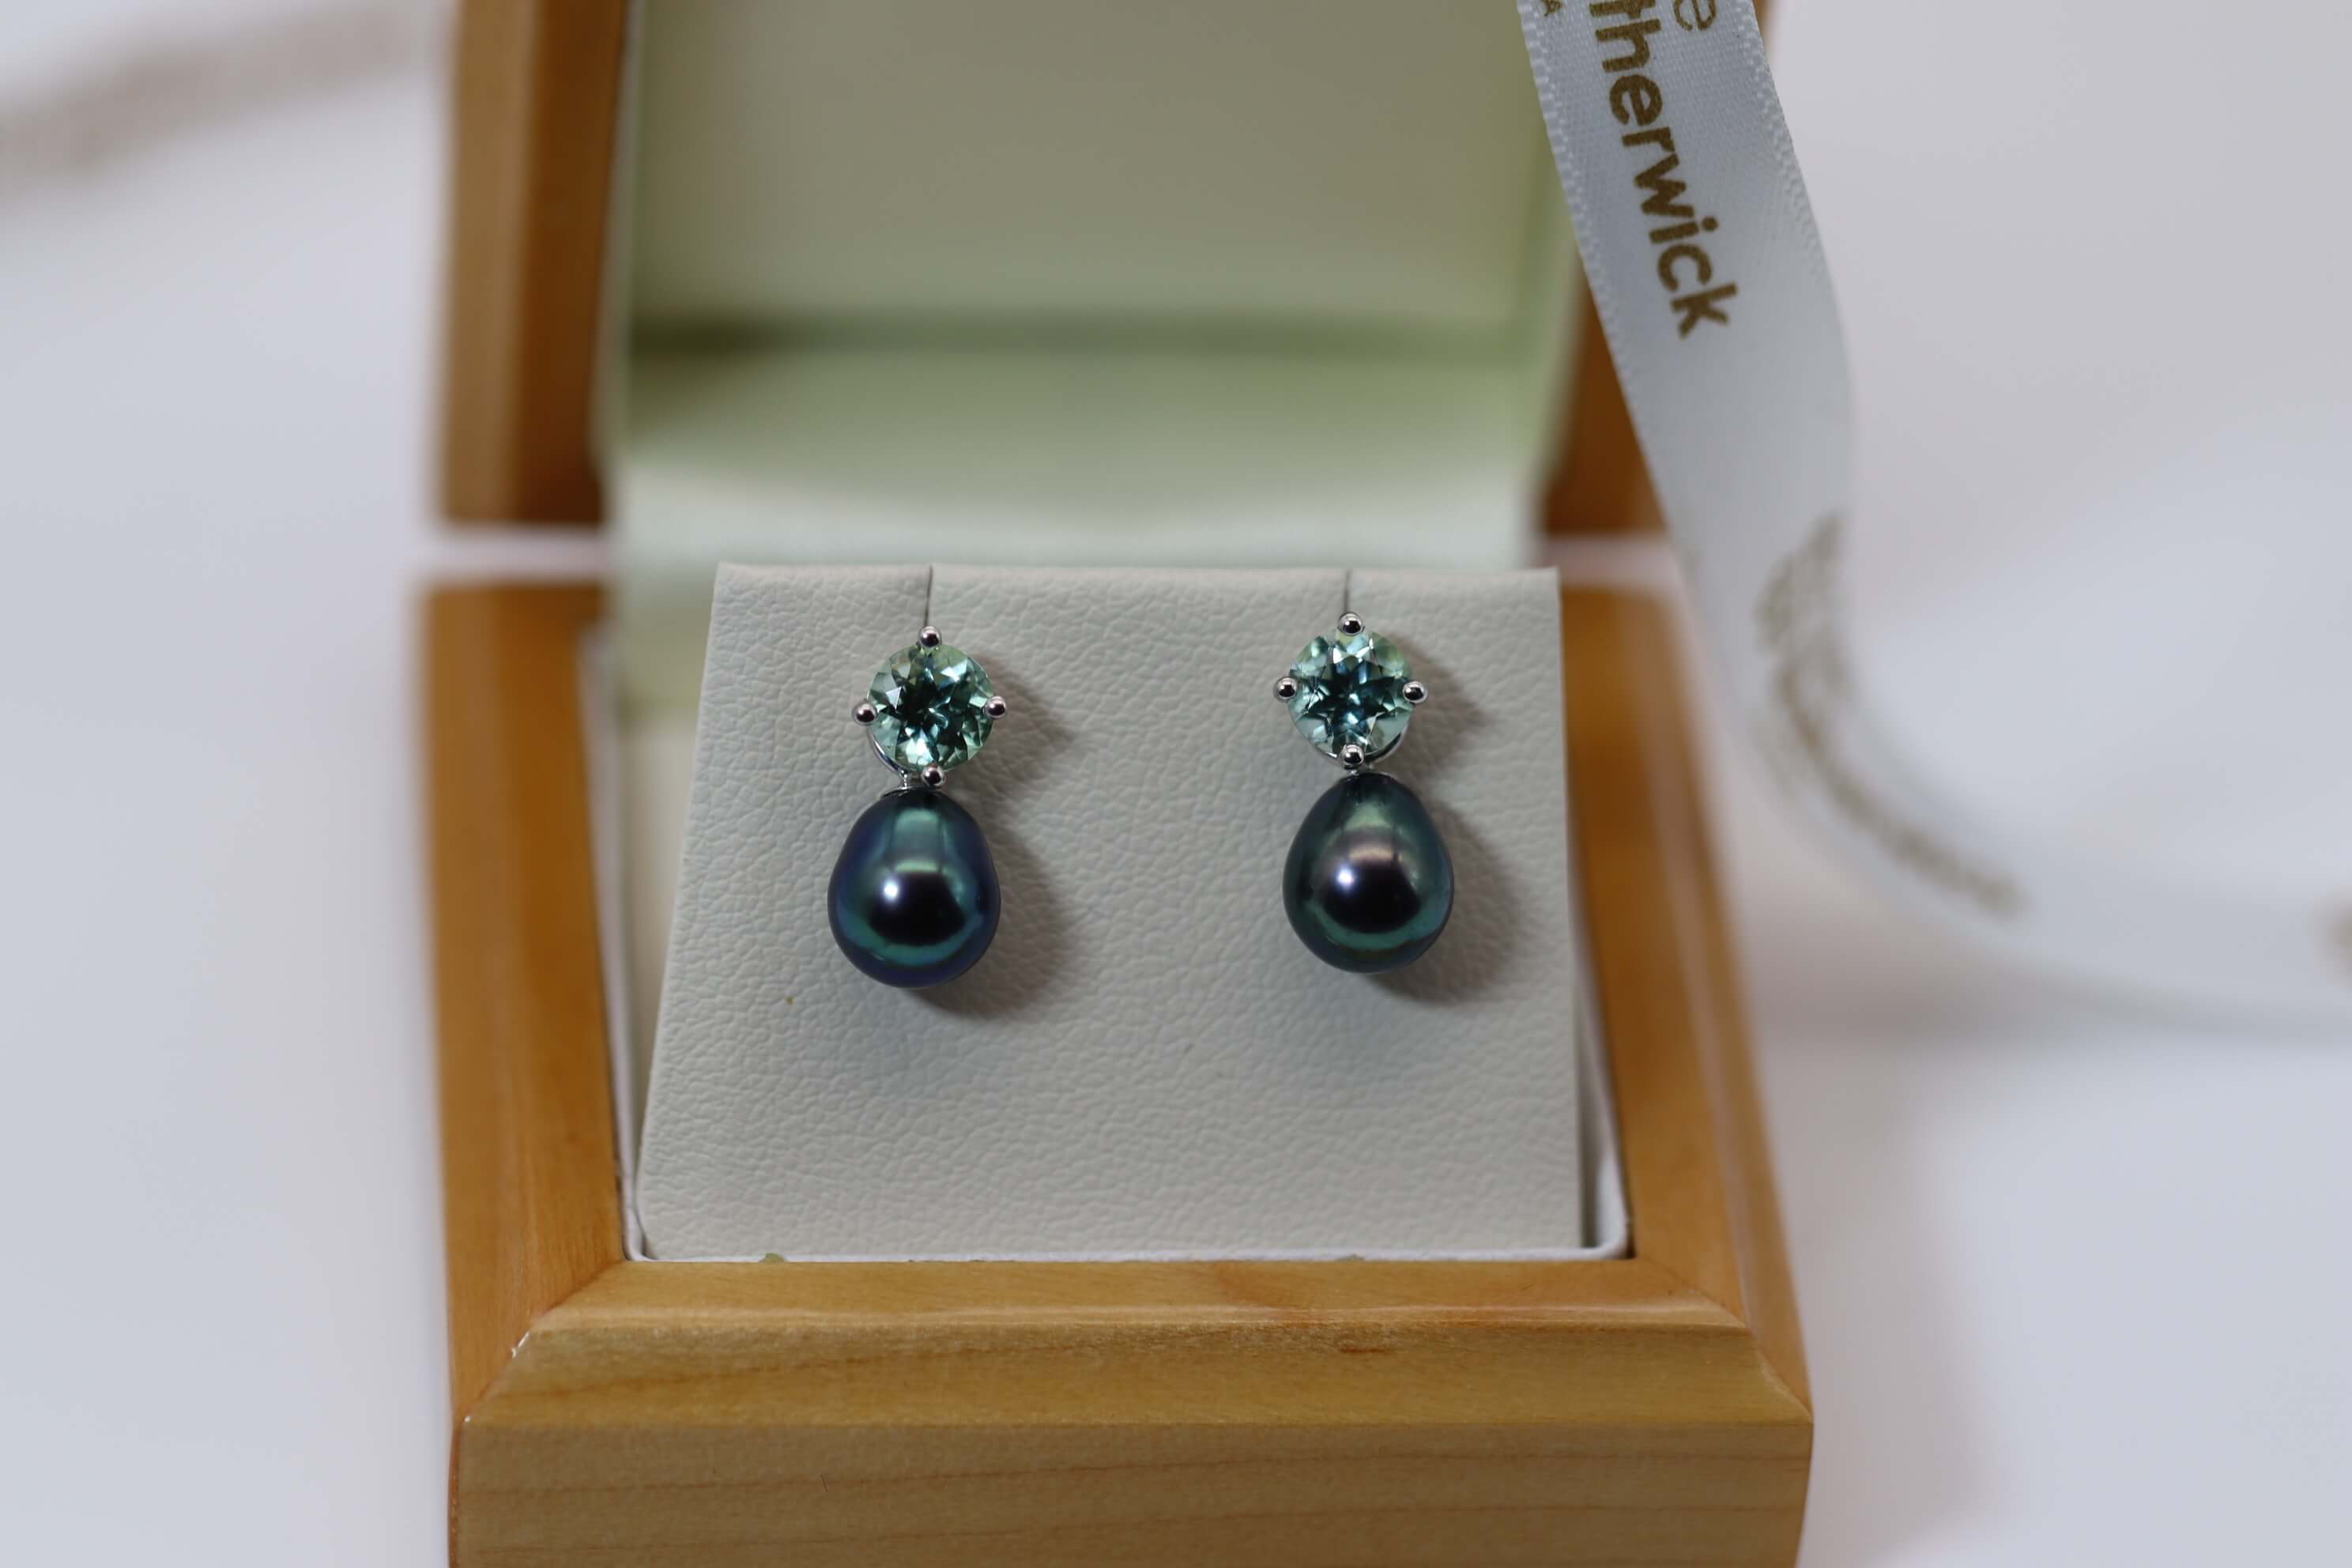 SOLD - HARMONY COLLECTION - A Pair of Mint Tourmaline Earstuds with Detachable Freshwater Cultured Pearl Drops